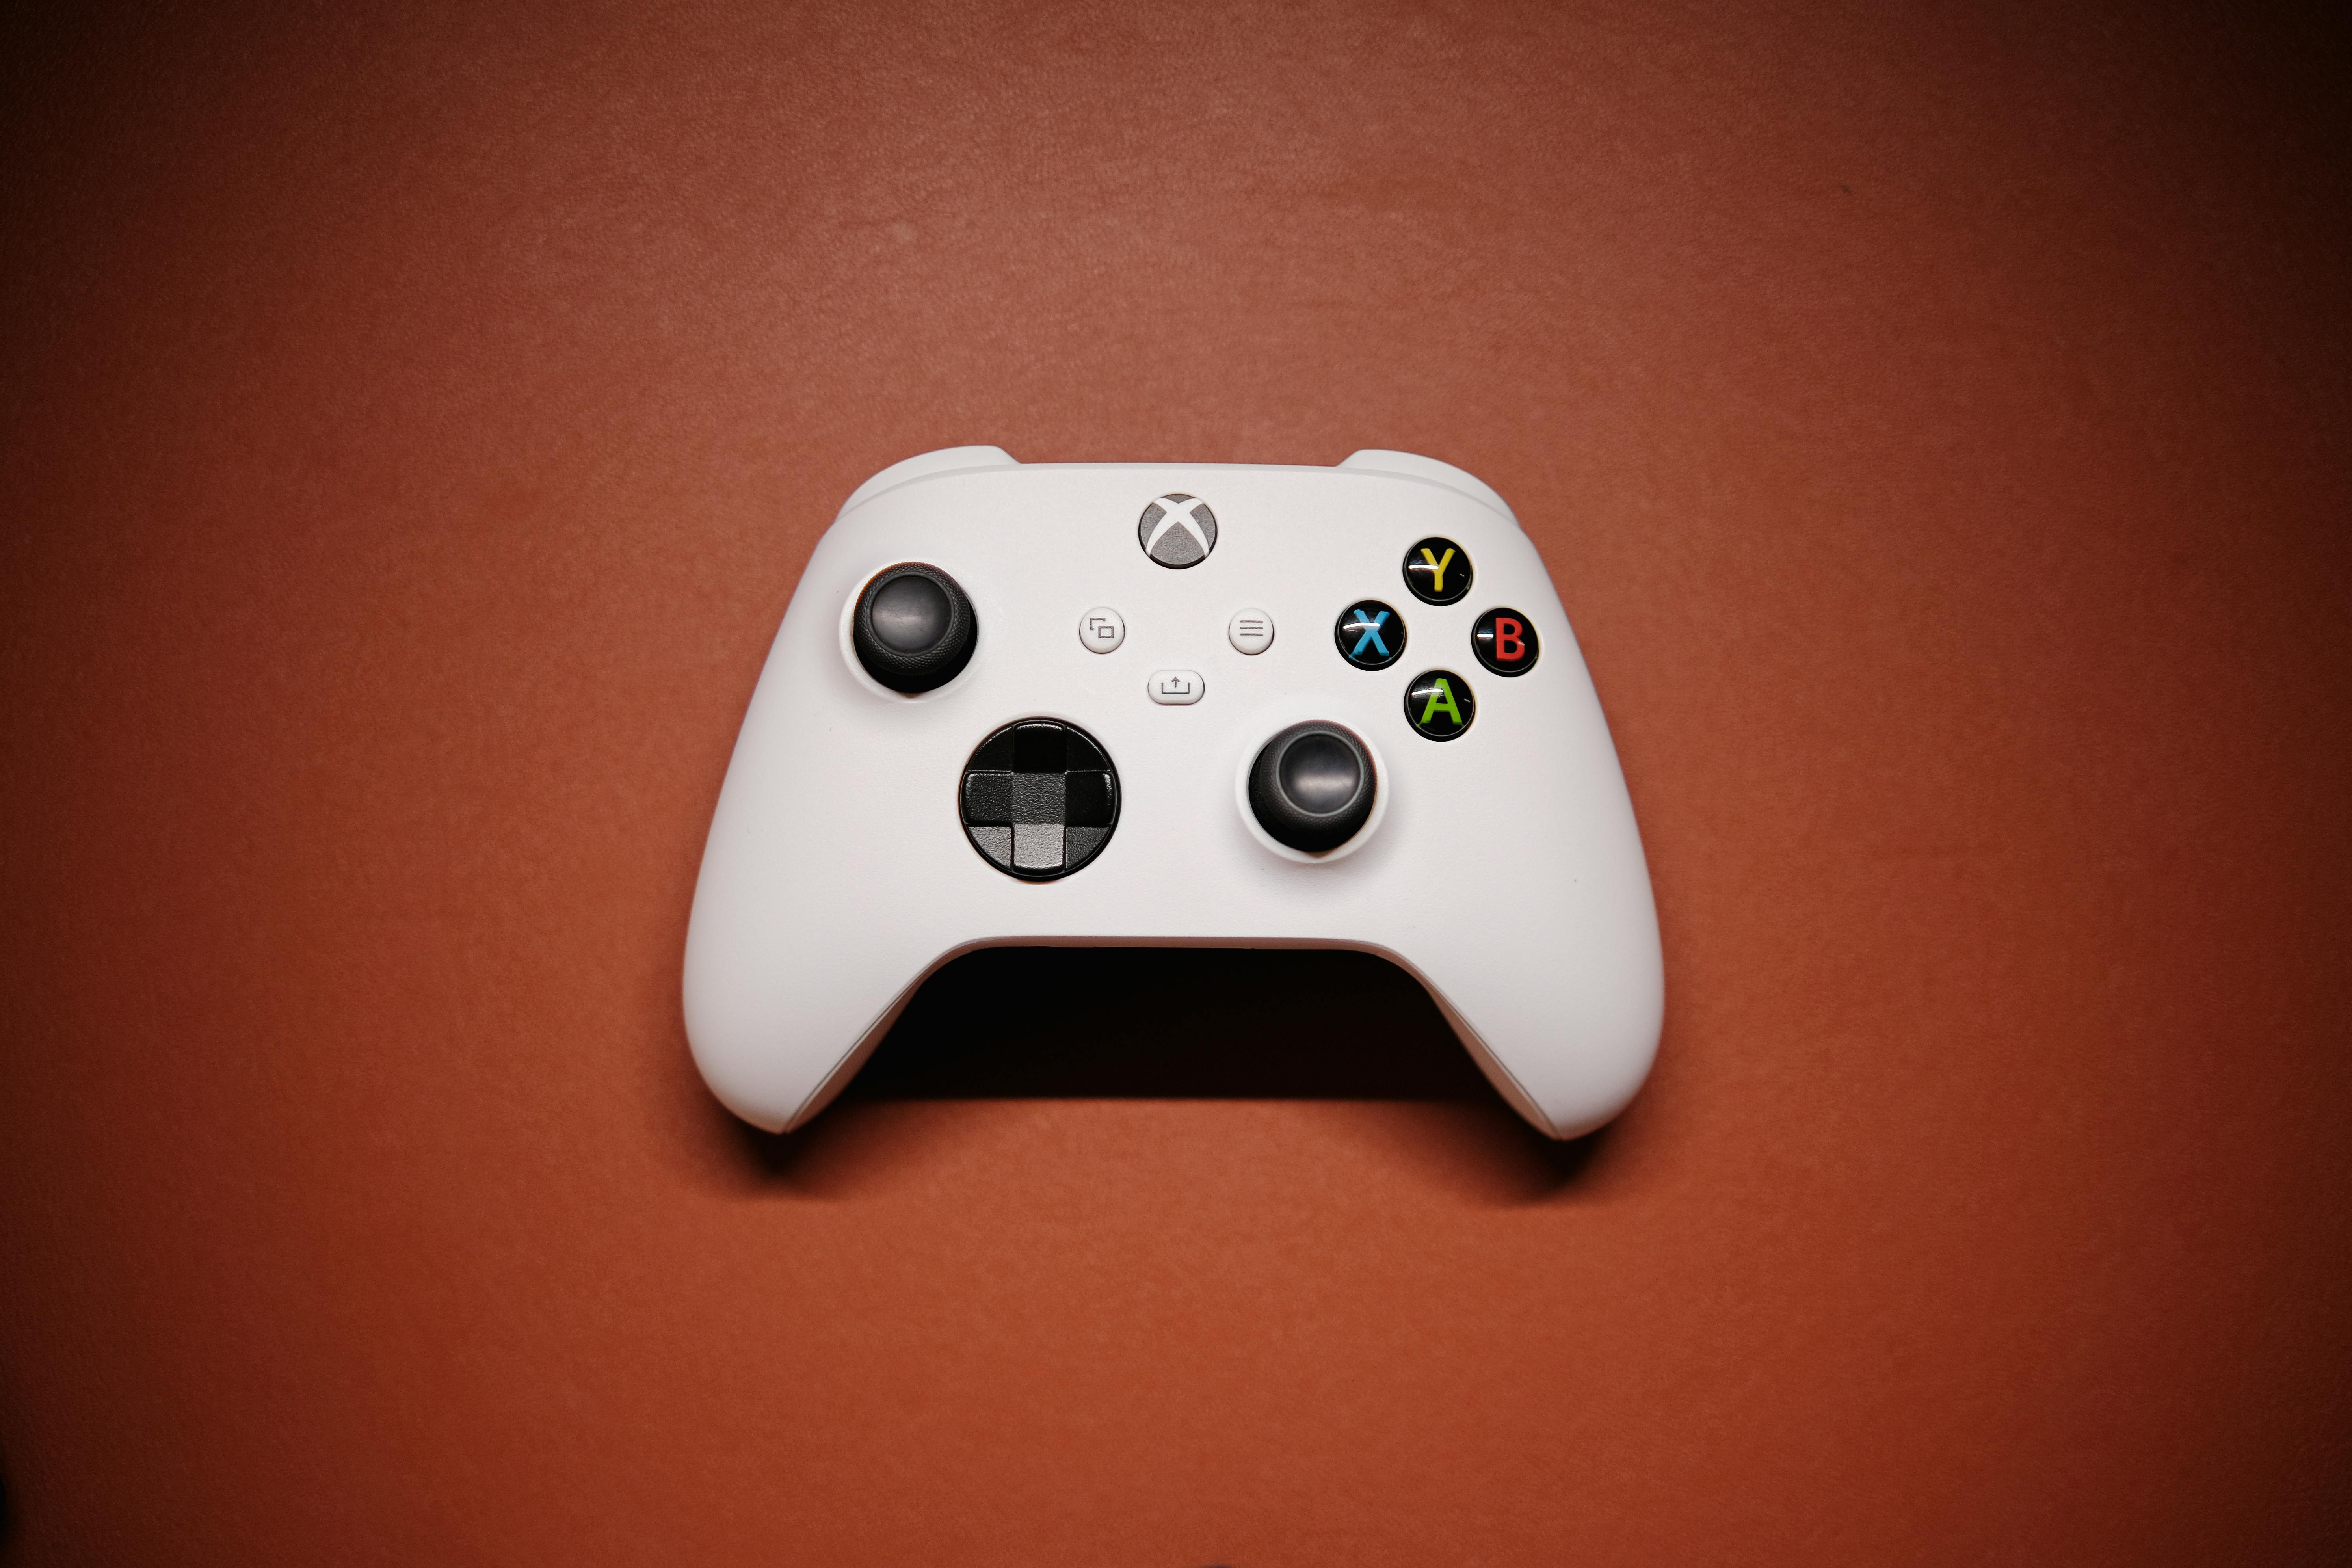 3,624 Control Xbox Royalty-Free Photos and Stock Images